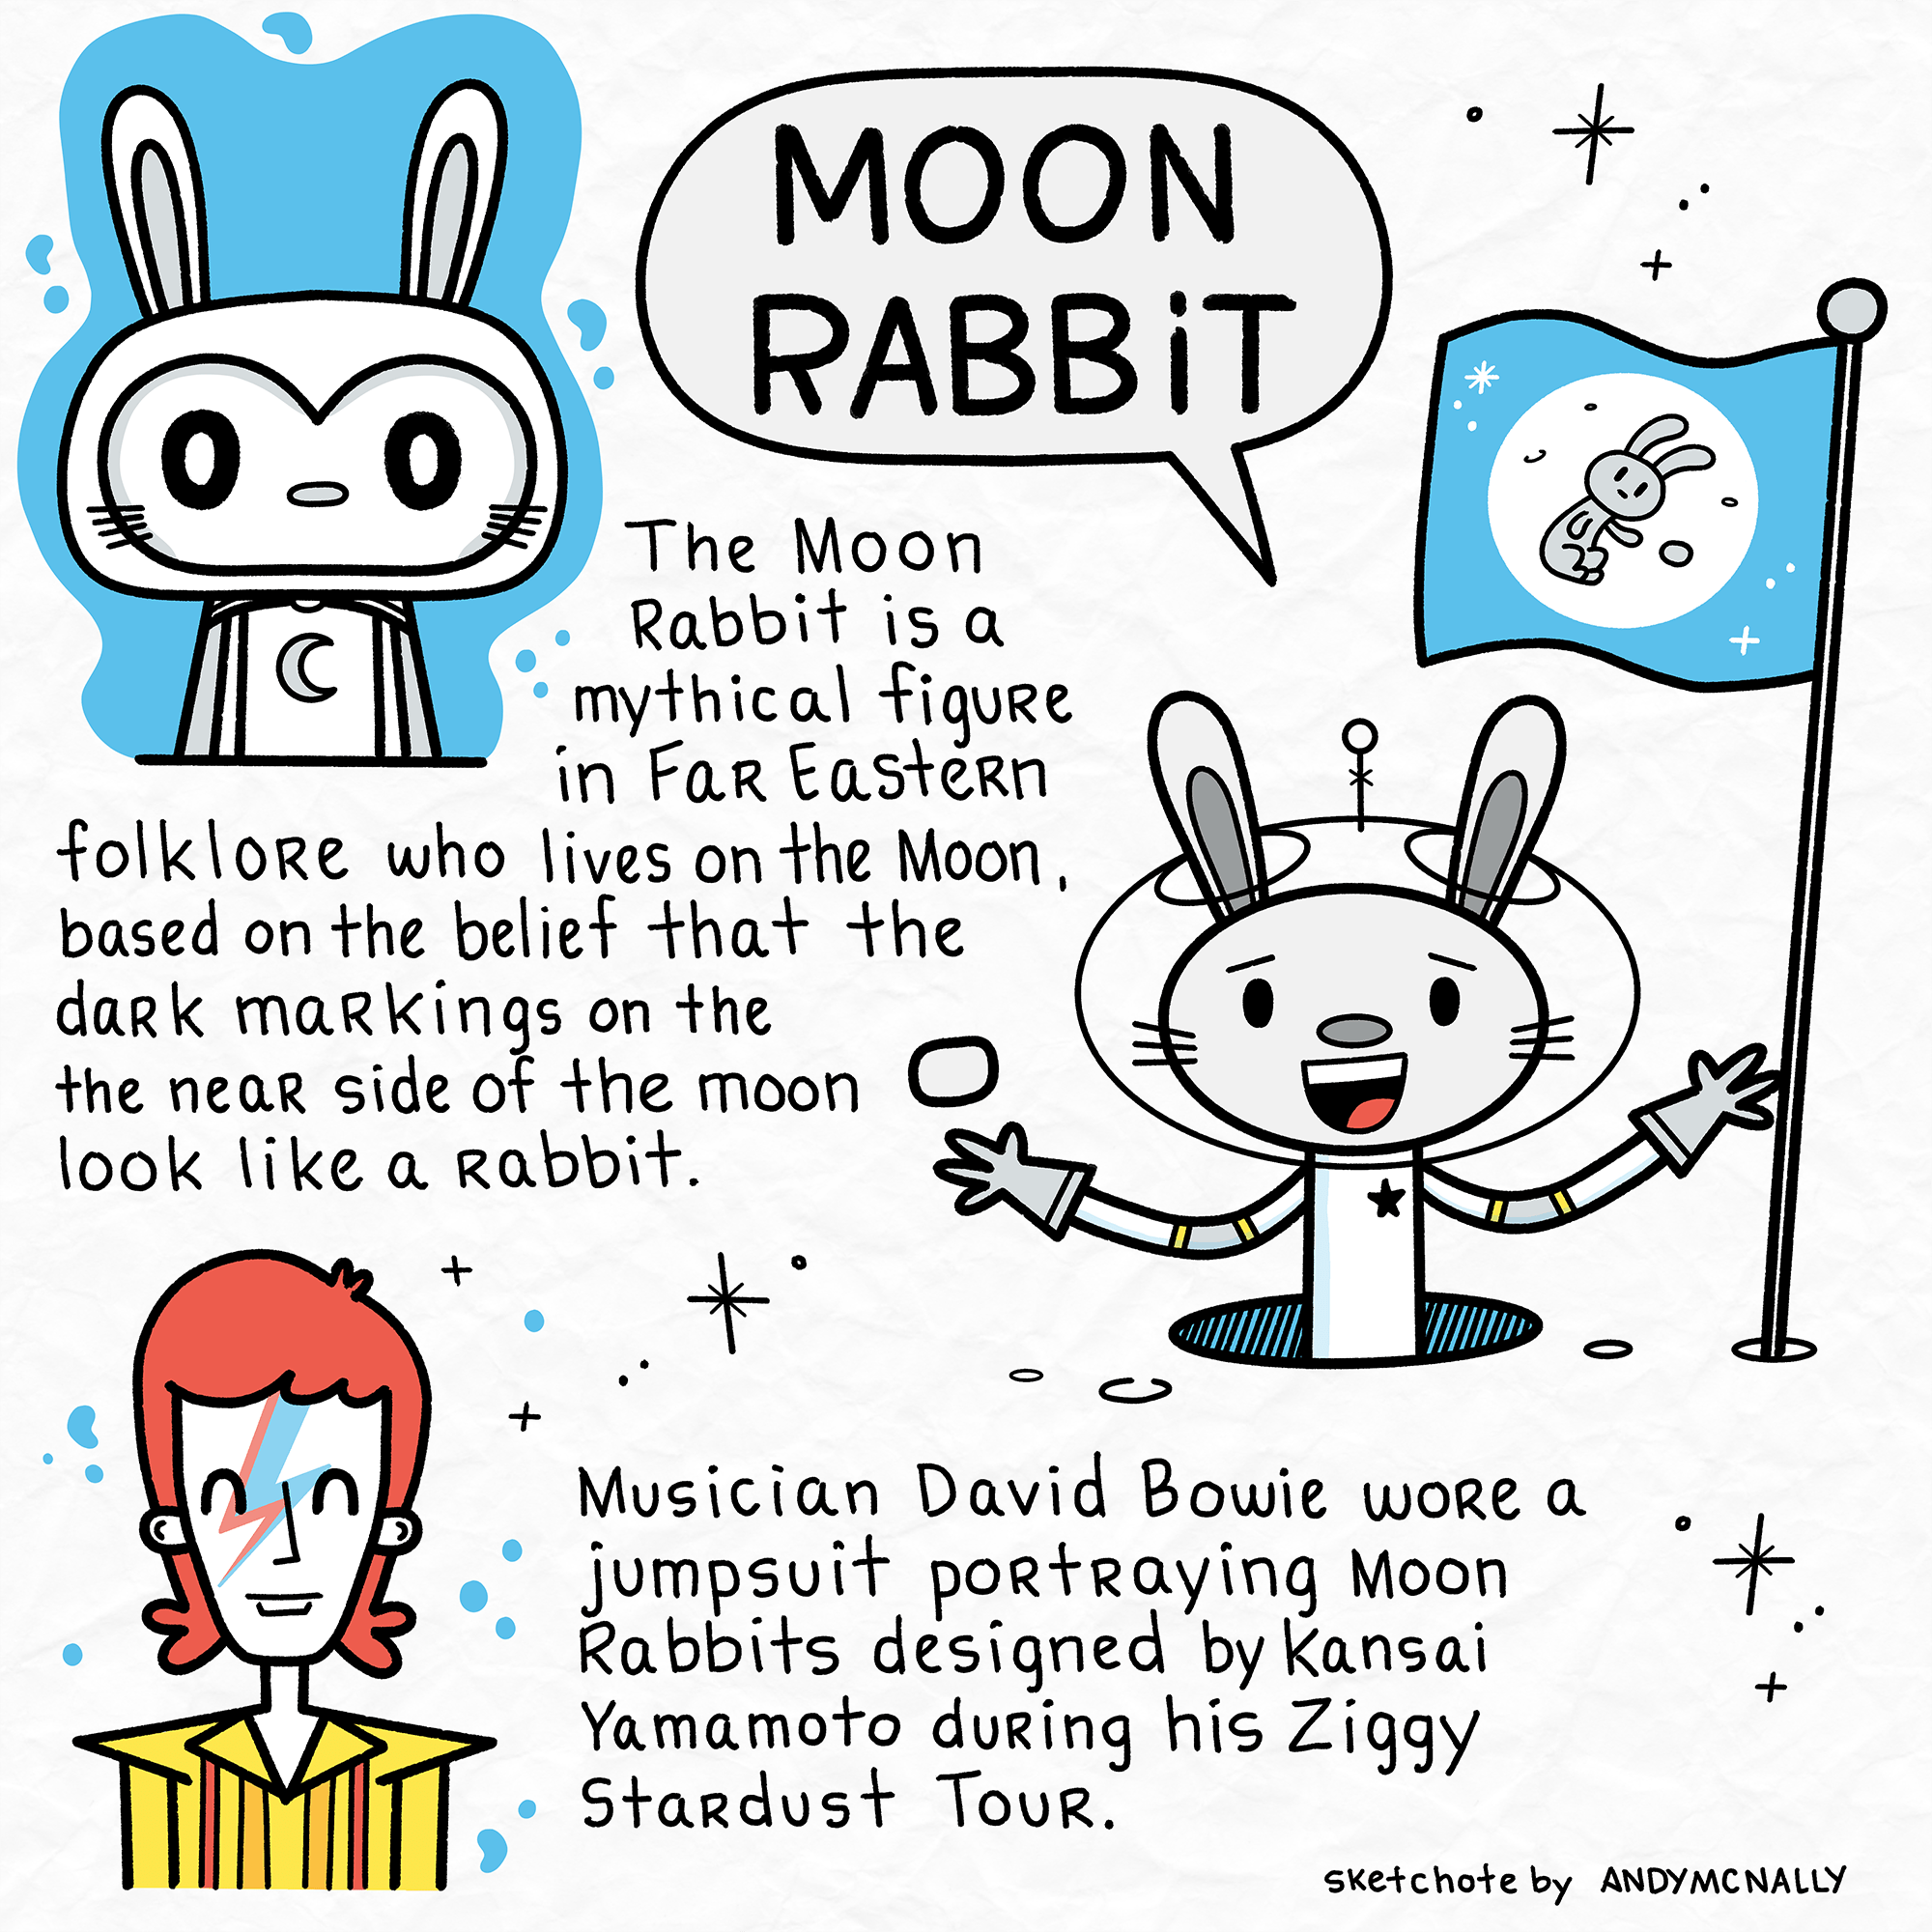 Moon Rabbit. A sketchnote about the rabbit that lives in the moon.